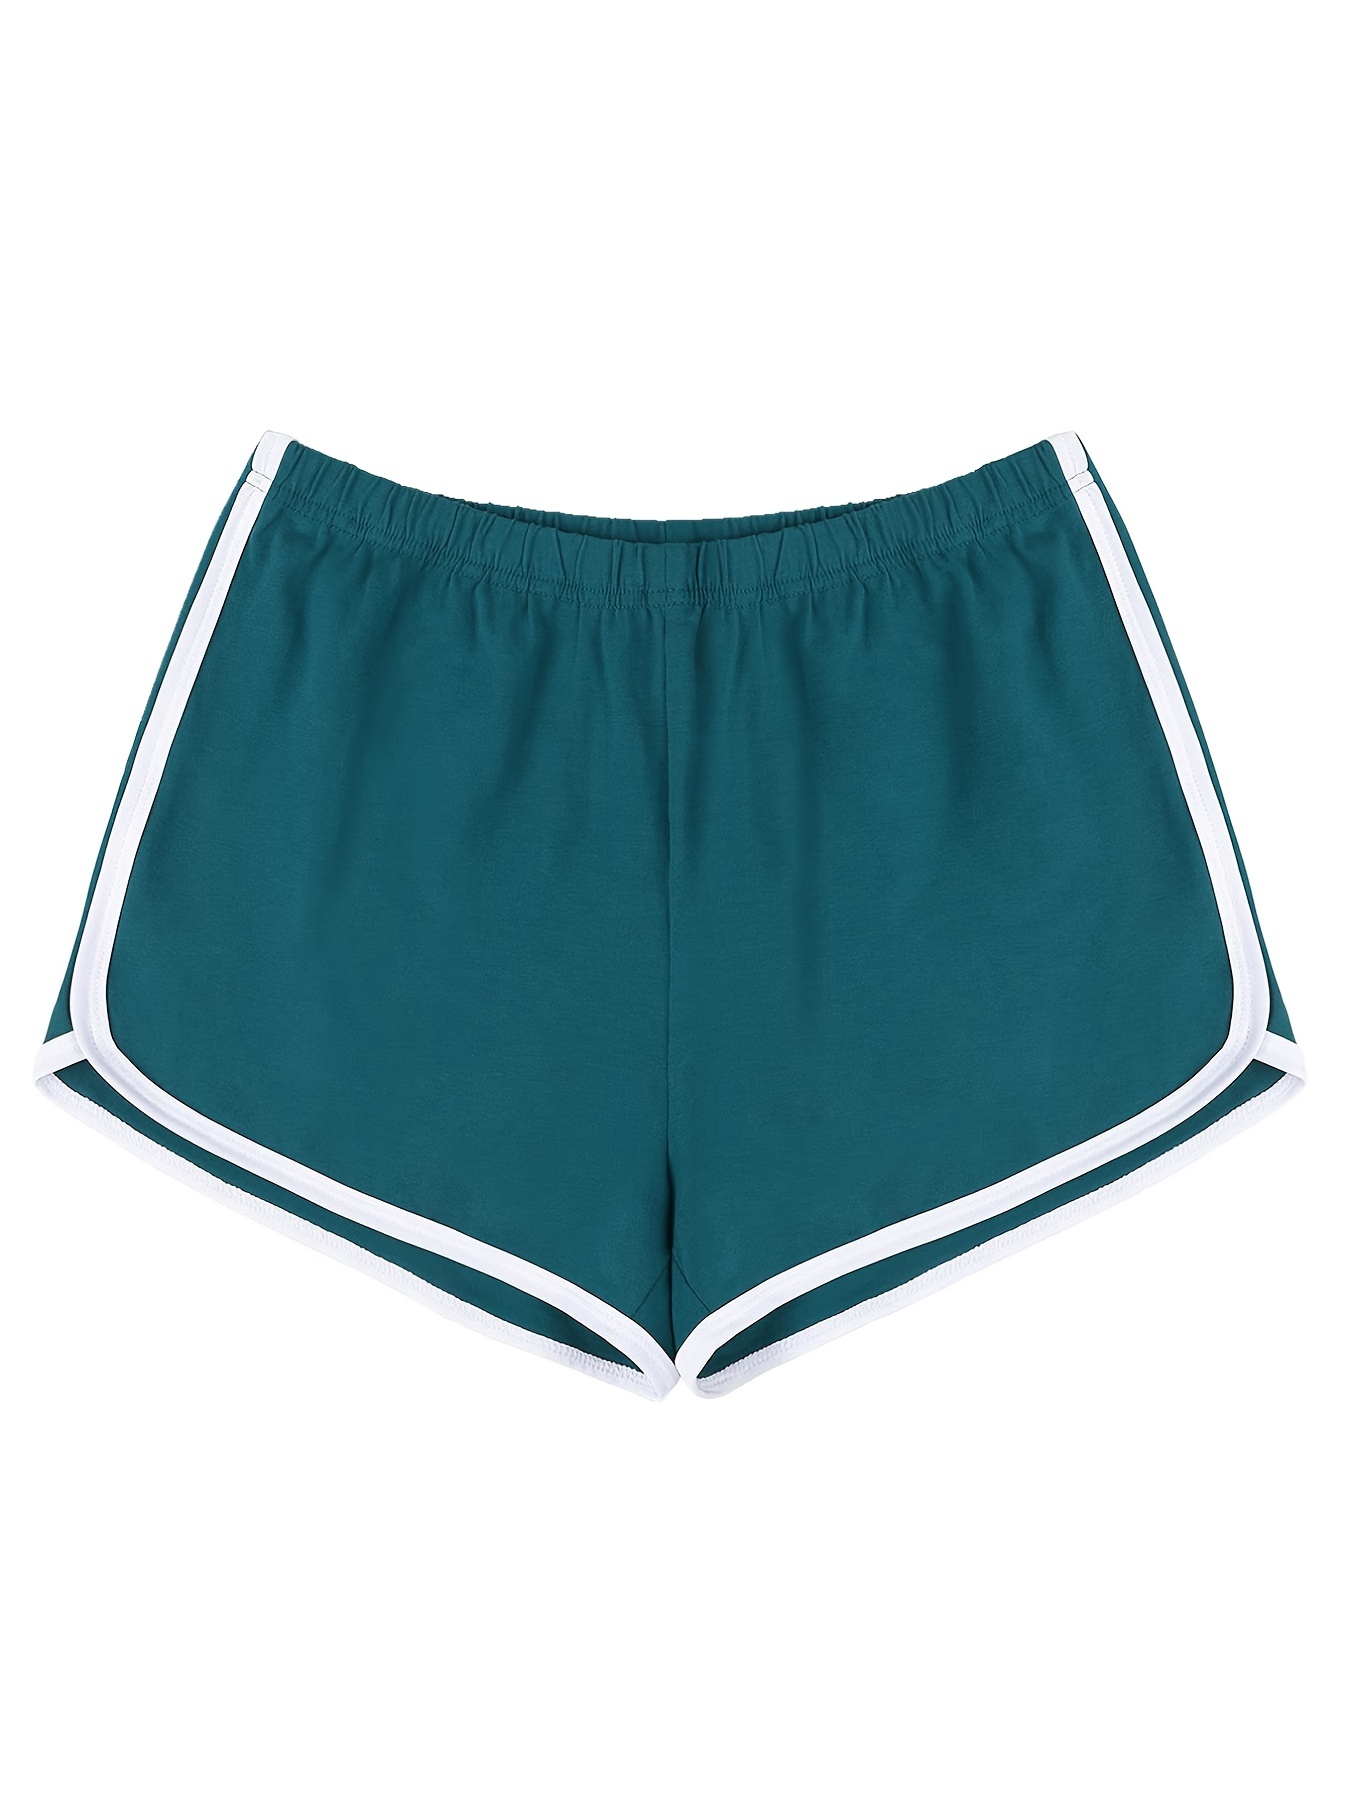 TYUIO Booty Shorts for Women Summer Side Tie Hot Yoga Athletic